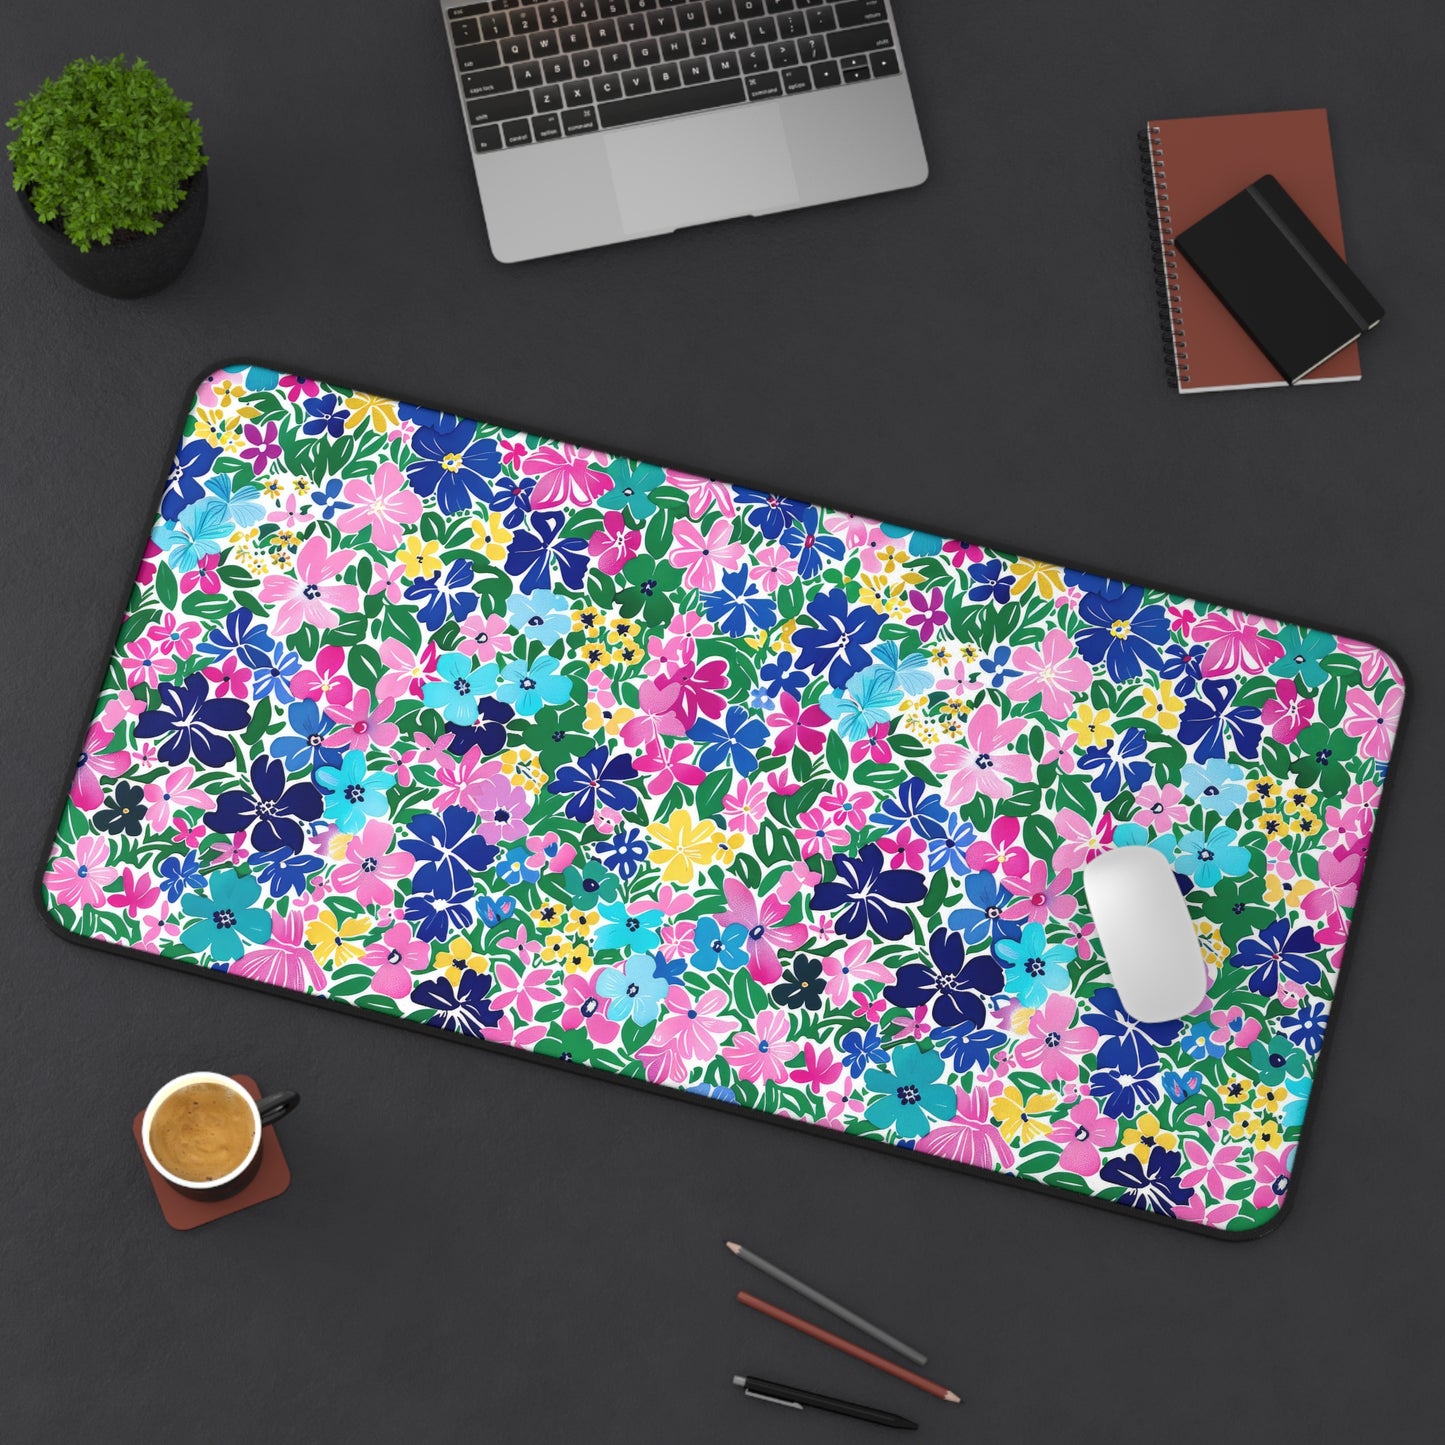 Rainbow Blooms: Vibrant Multi-color Watercolor Flowers in Full Bloom Desk Mat Extended Gaming Mouse Pad - 3 Sizes